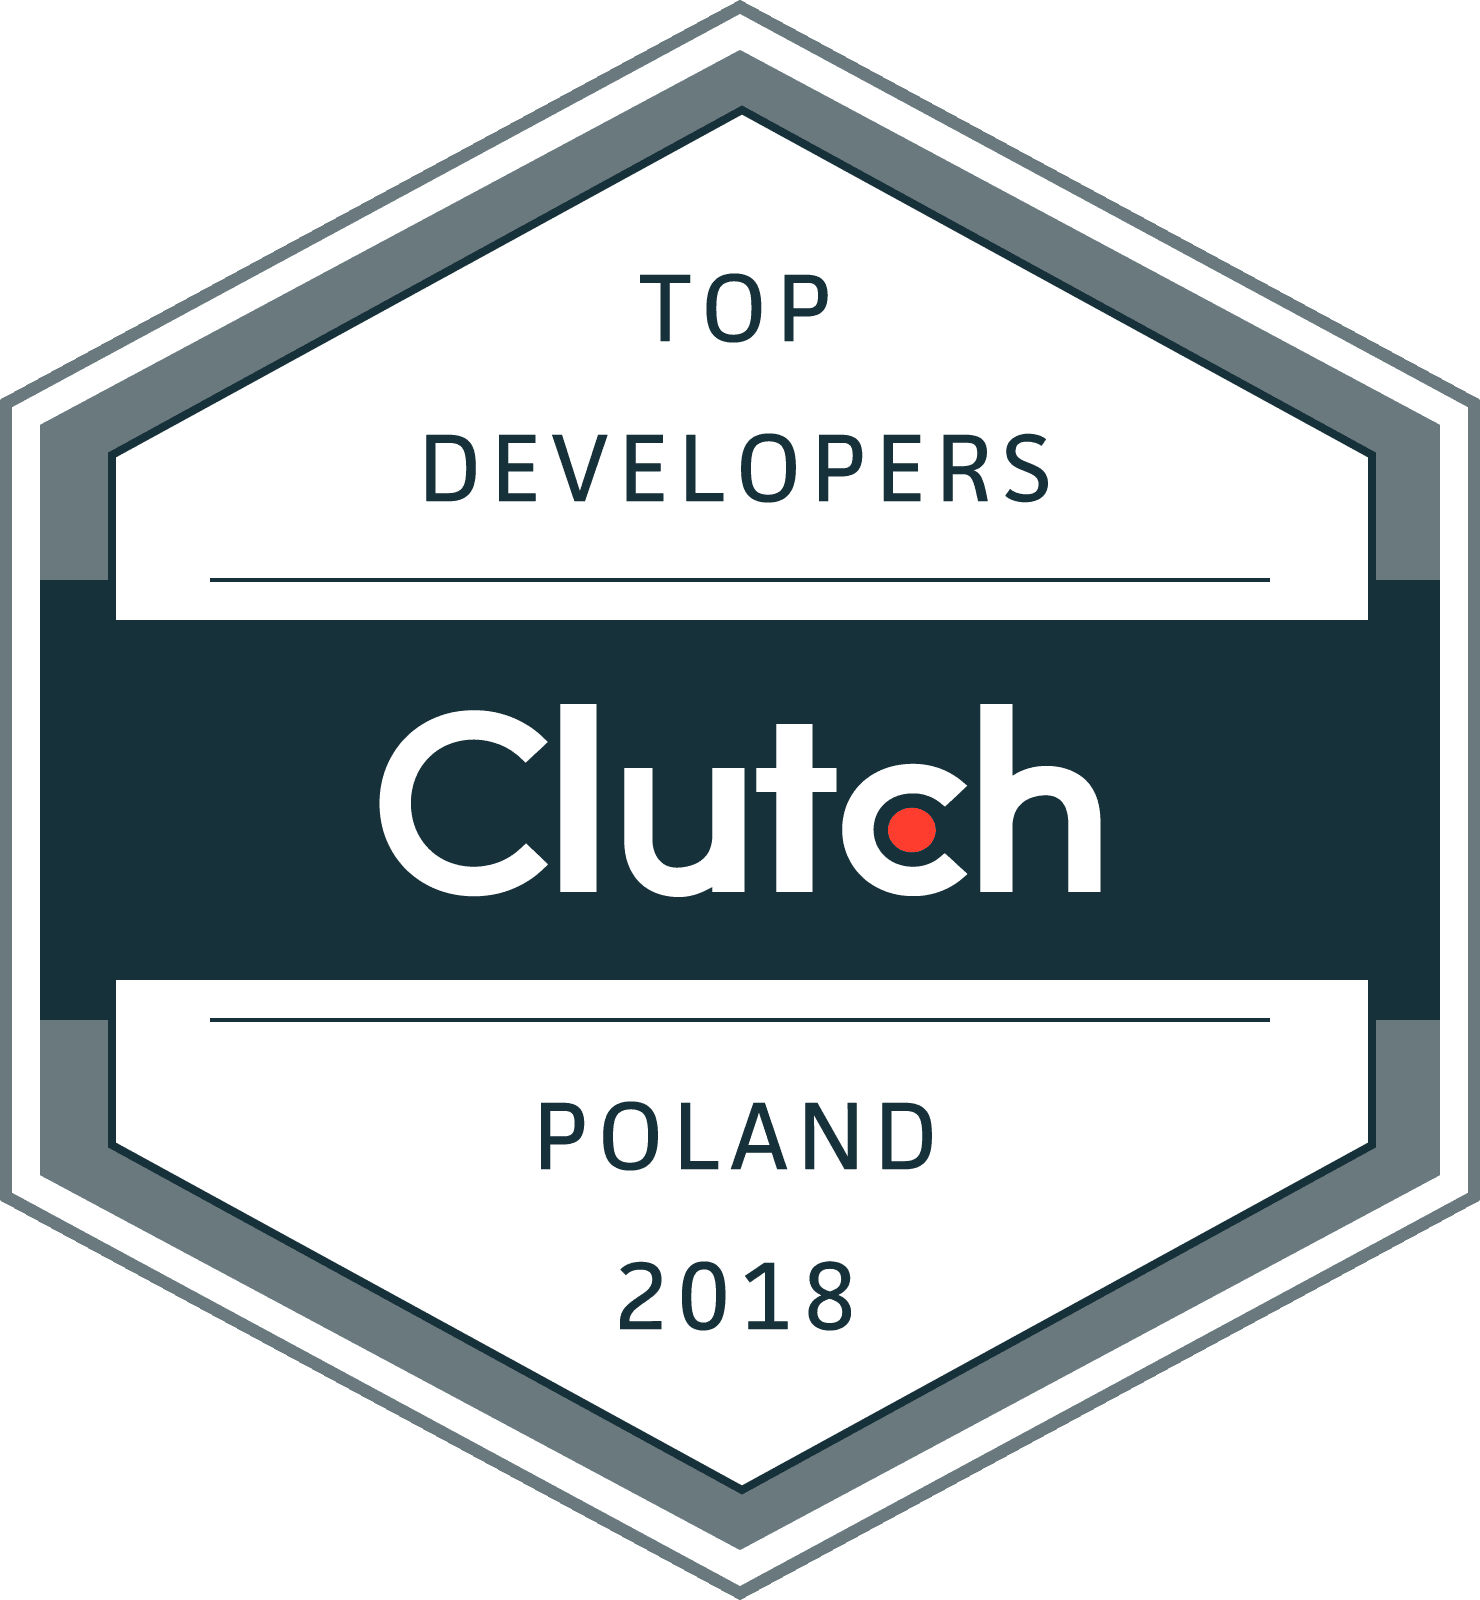 Bright Inventions Remains a Top Developer in Poland